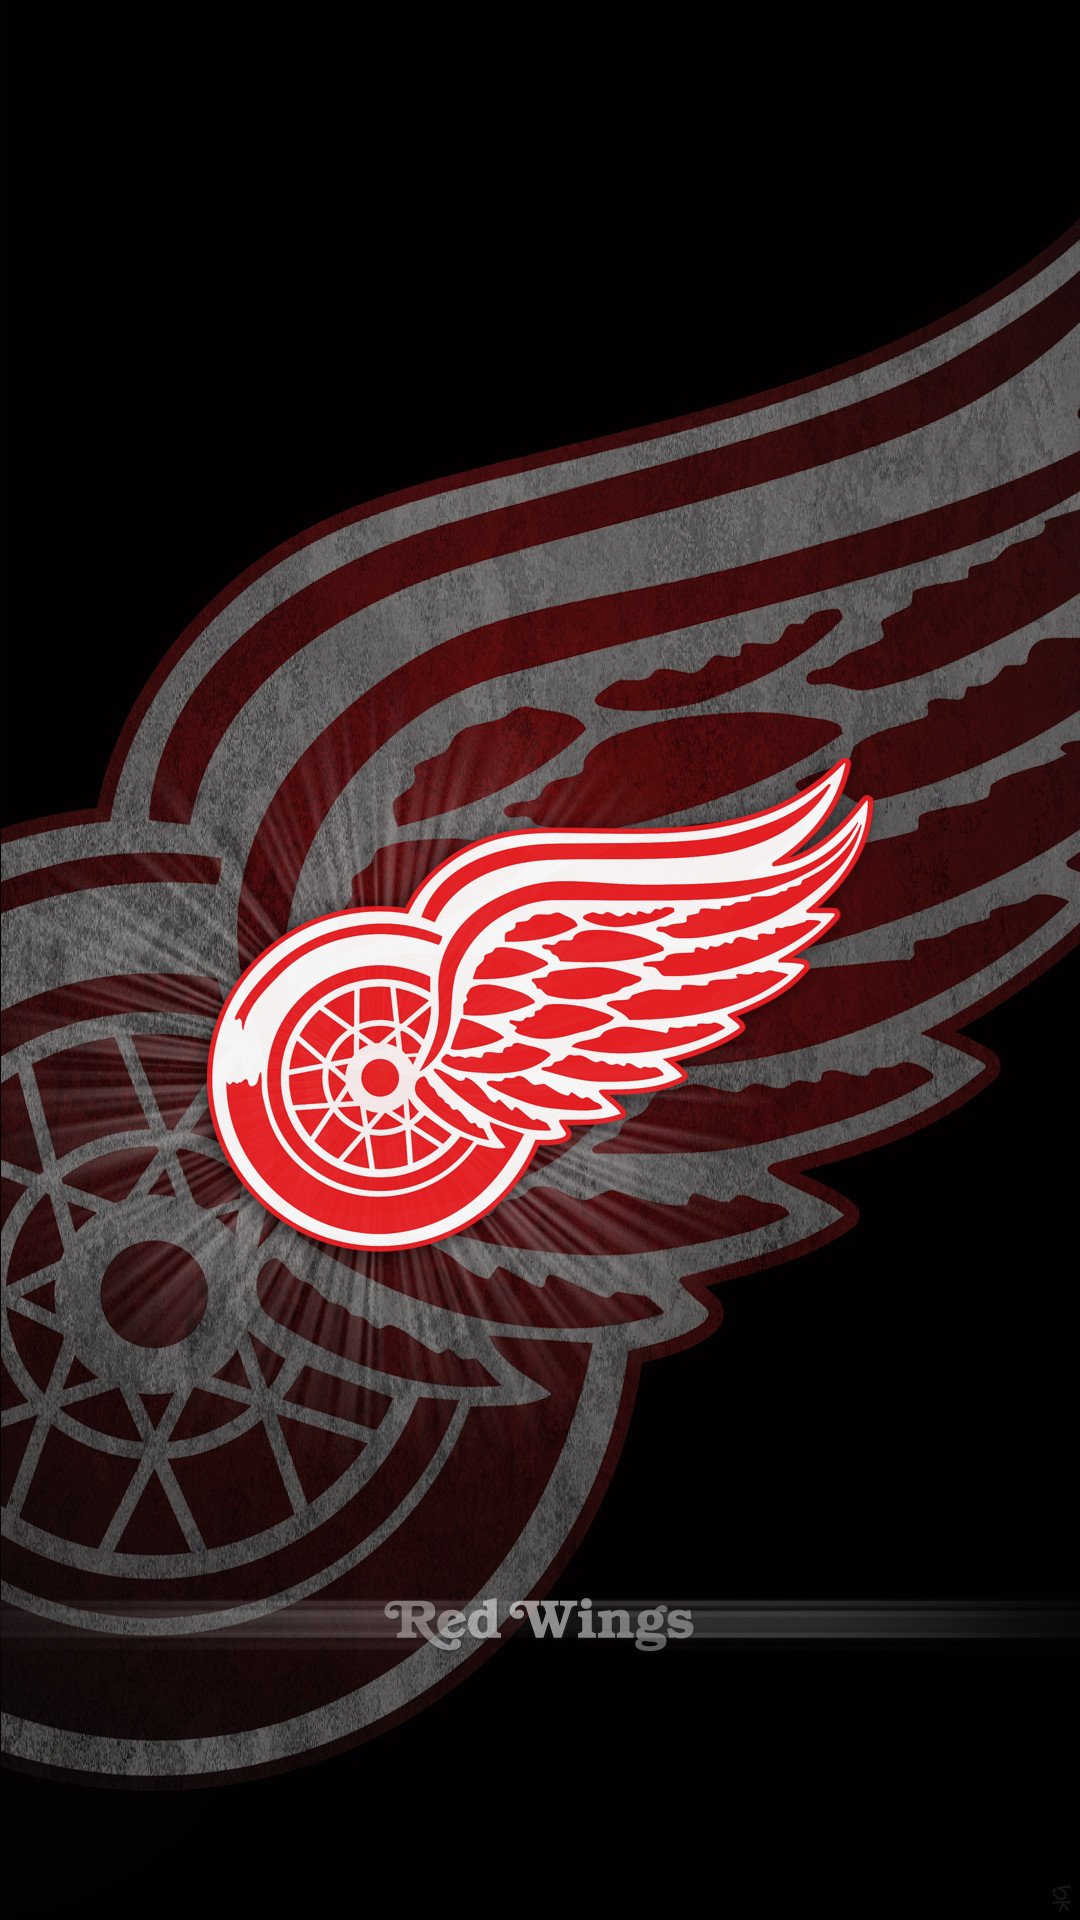 1080x1920 ... Red Wings Wallpapers - Wallpaper Cave ...